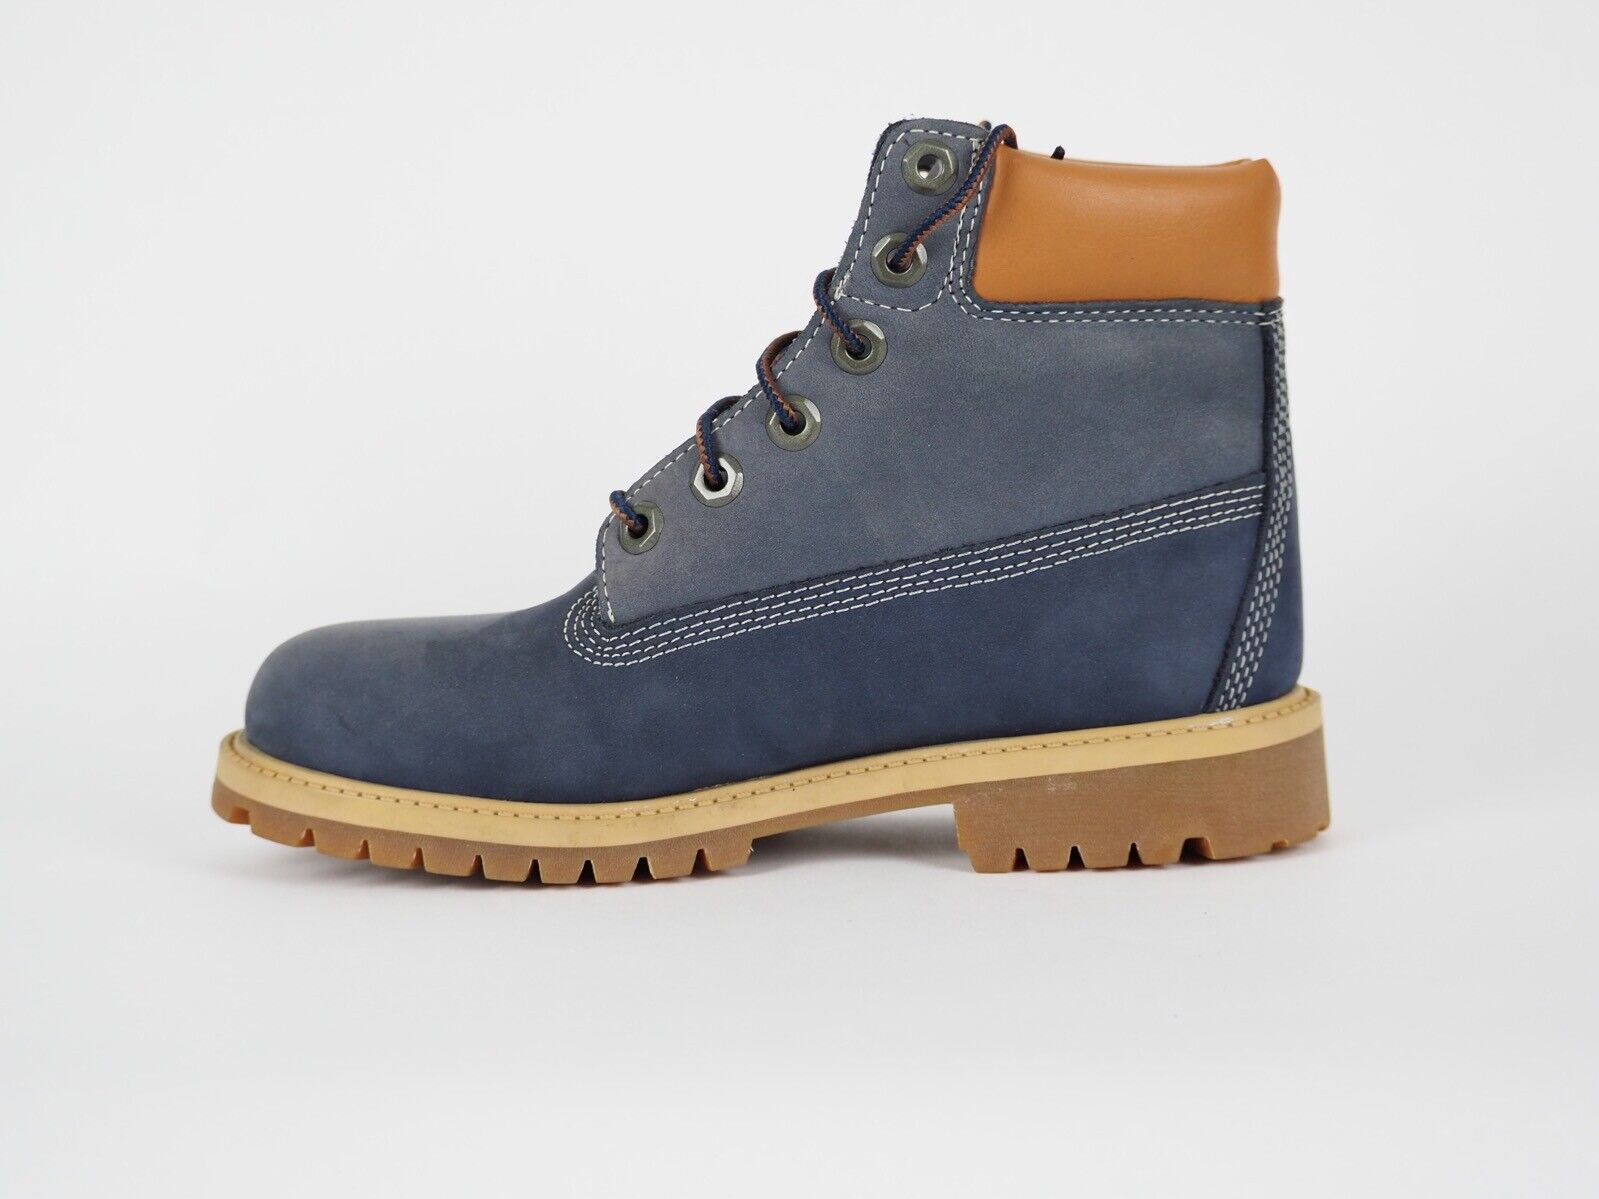 Boys Timberland 6 Inch Premium A14ZD Blue Leather Lace Up Winter Chukka Boots